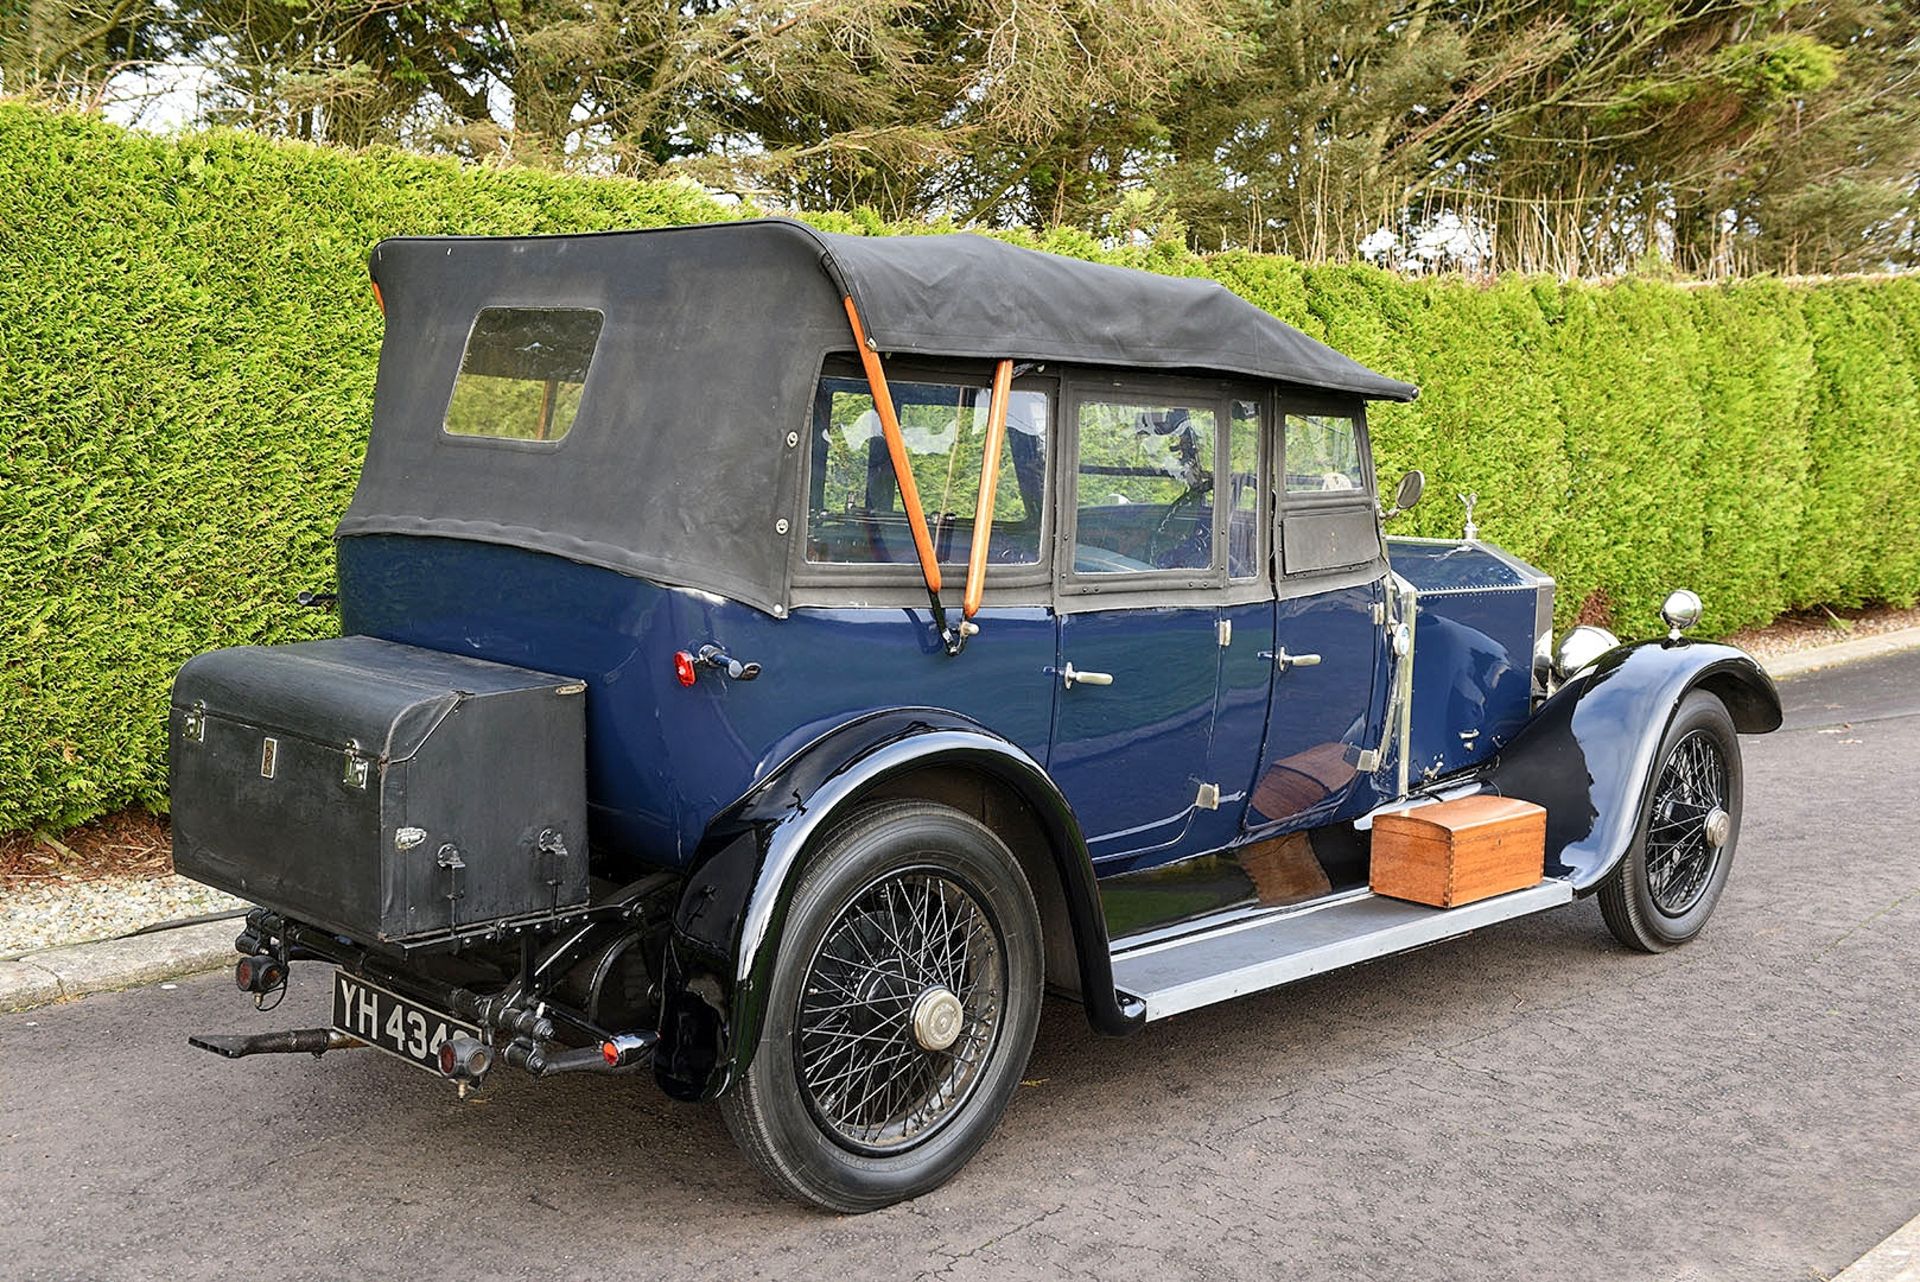 YH 4348 1926 Rolls-Royce 20 chassis bodied in Penman's of Dumfries - Image 54 of 65